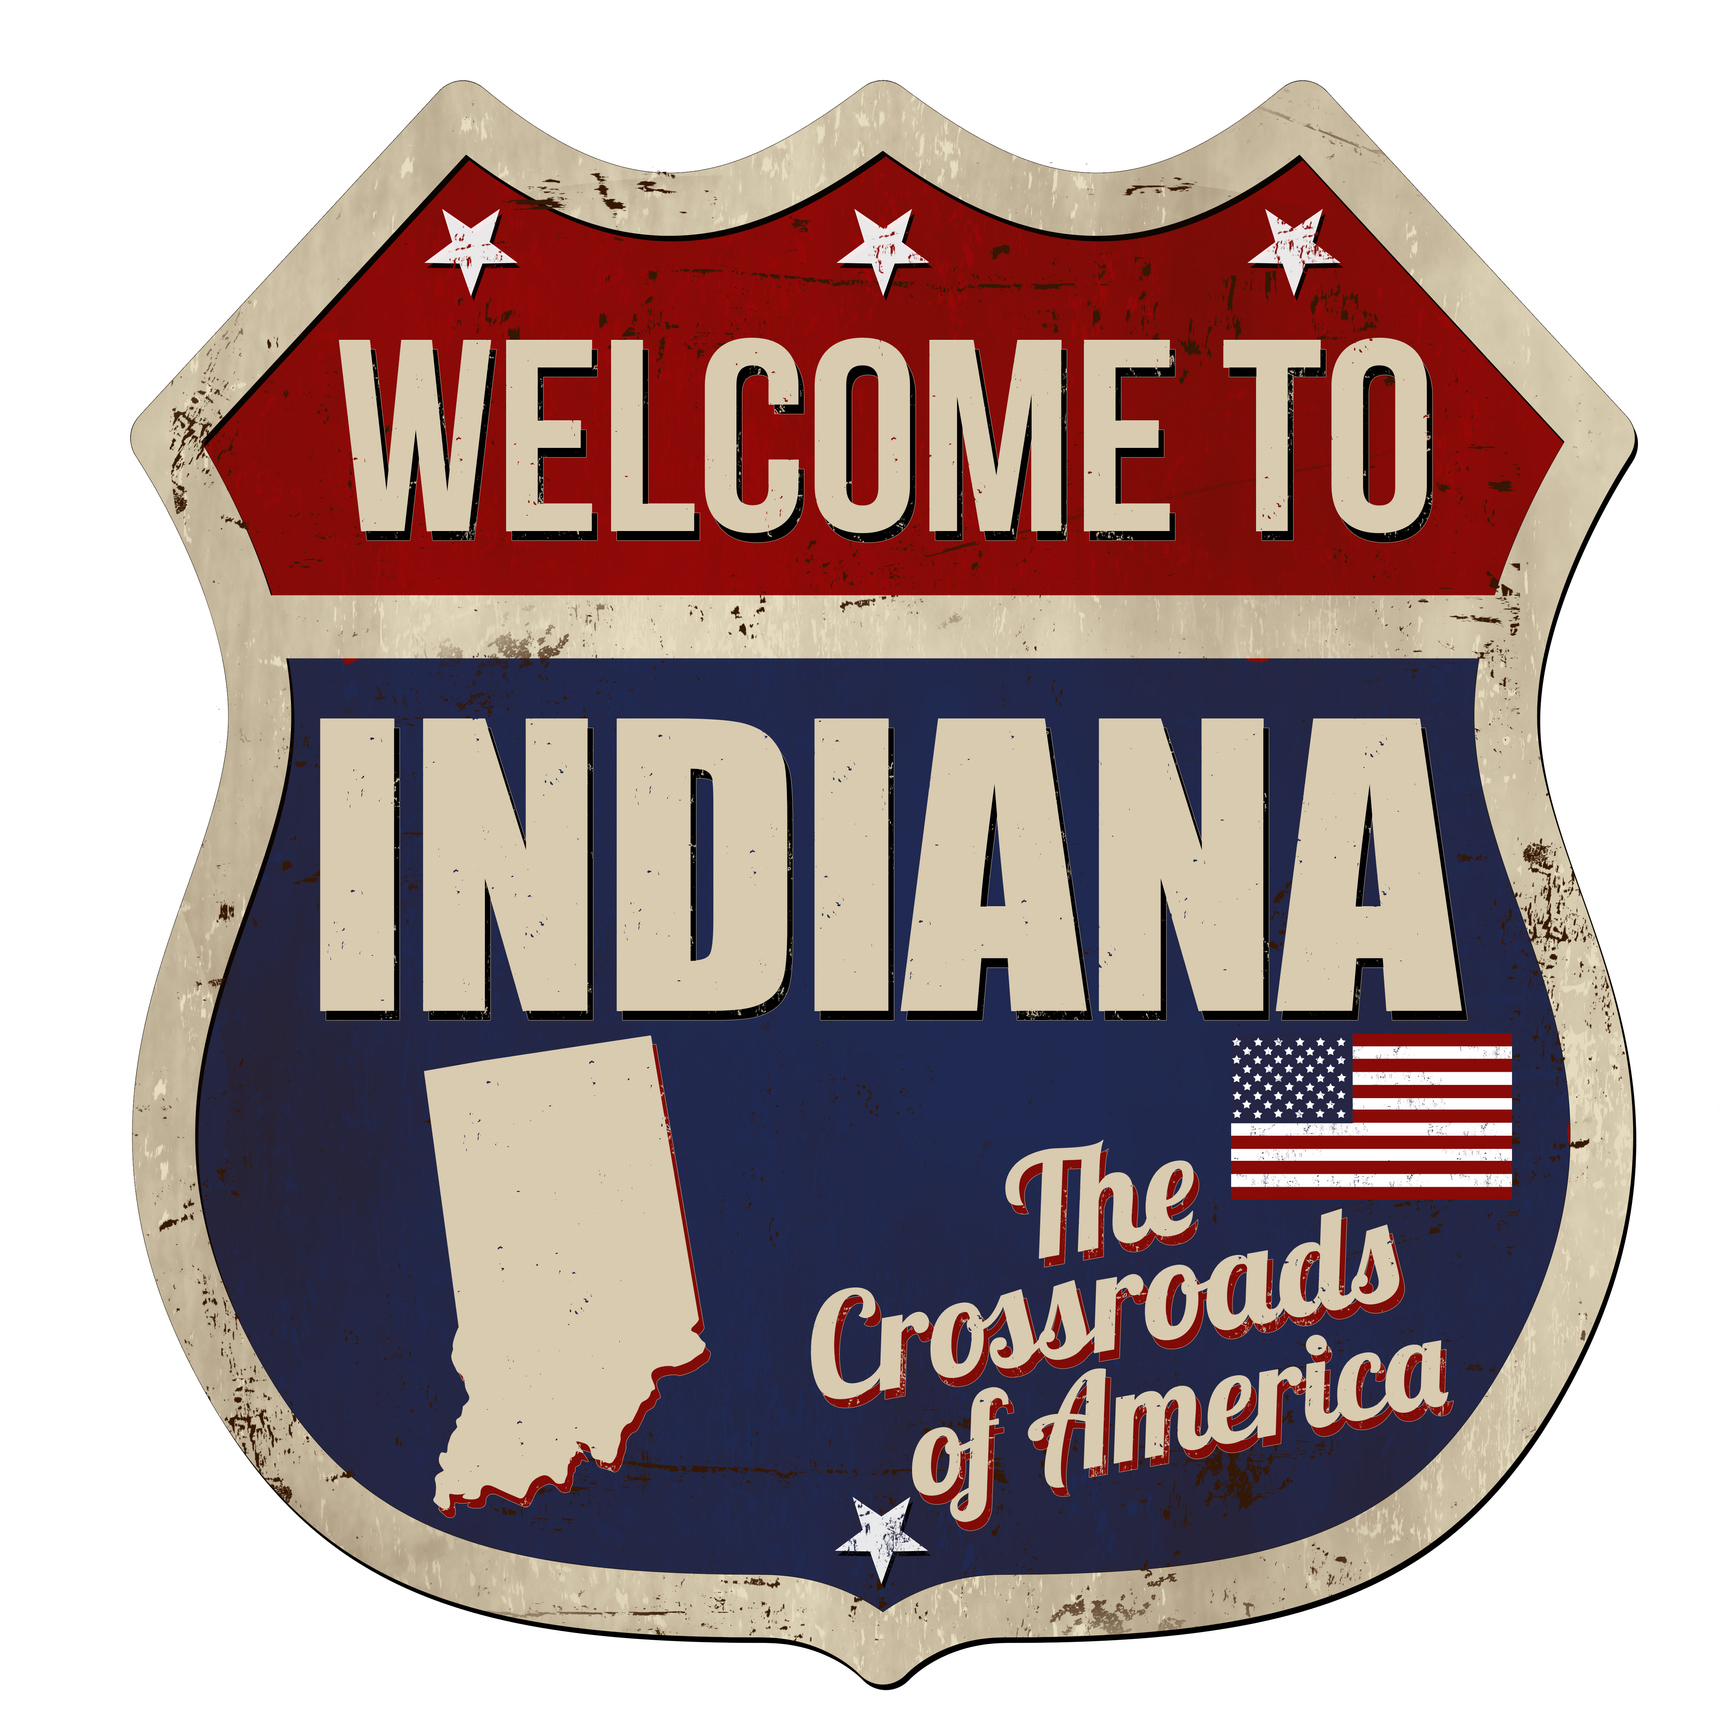 "Welcome to Indiana" rusty metal sign on a white background